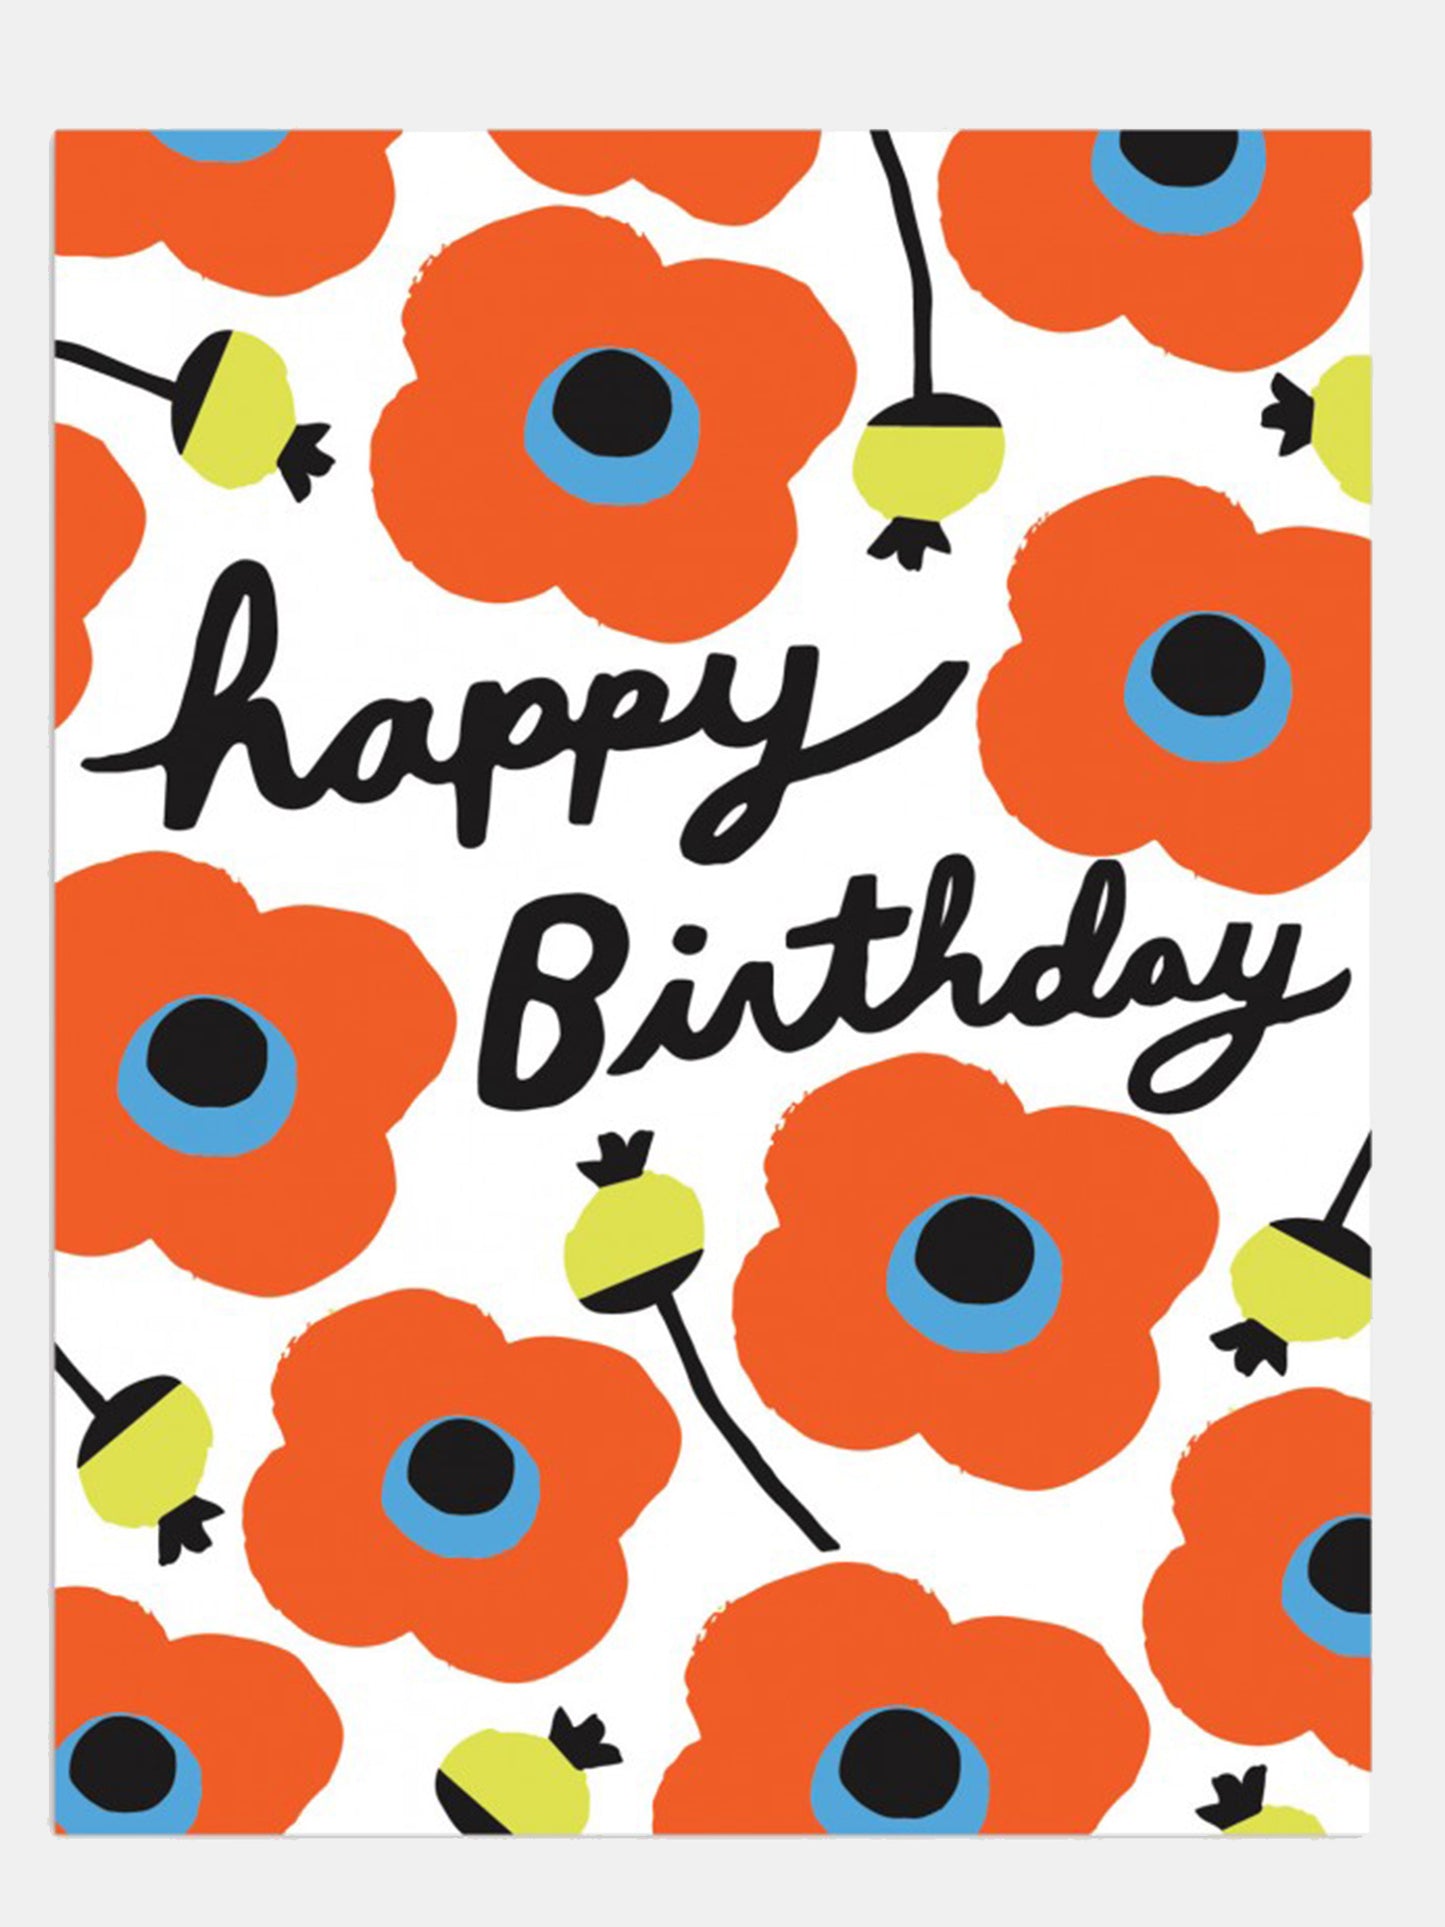 The Found Poppies Floral Happy Birthday Card